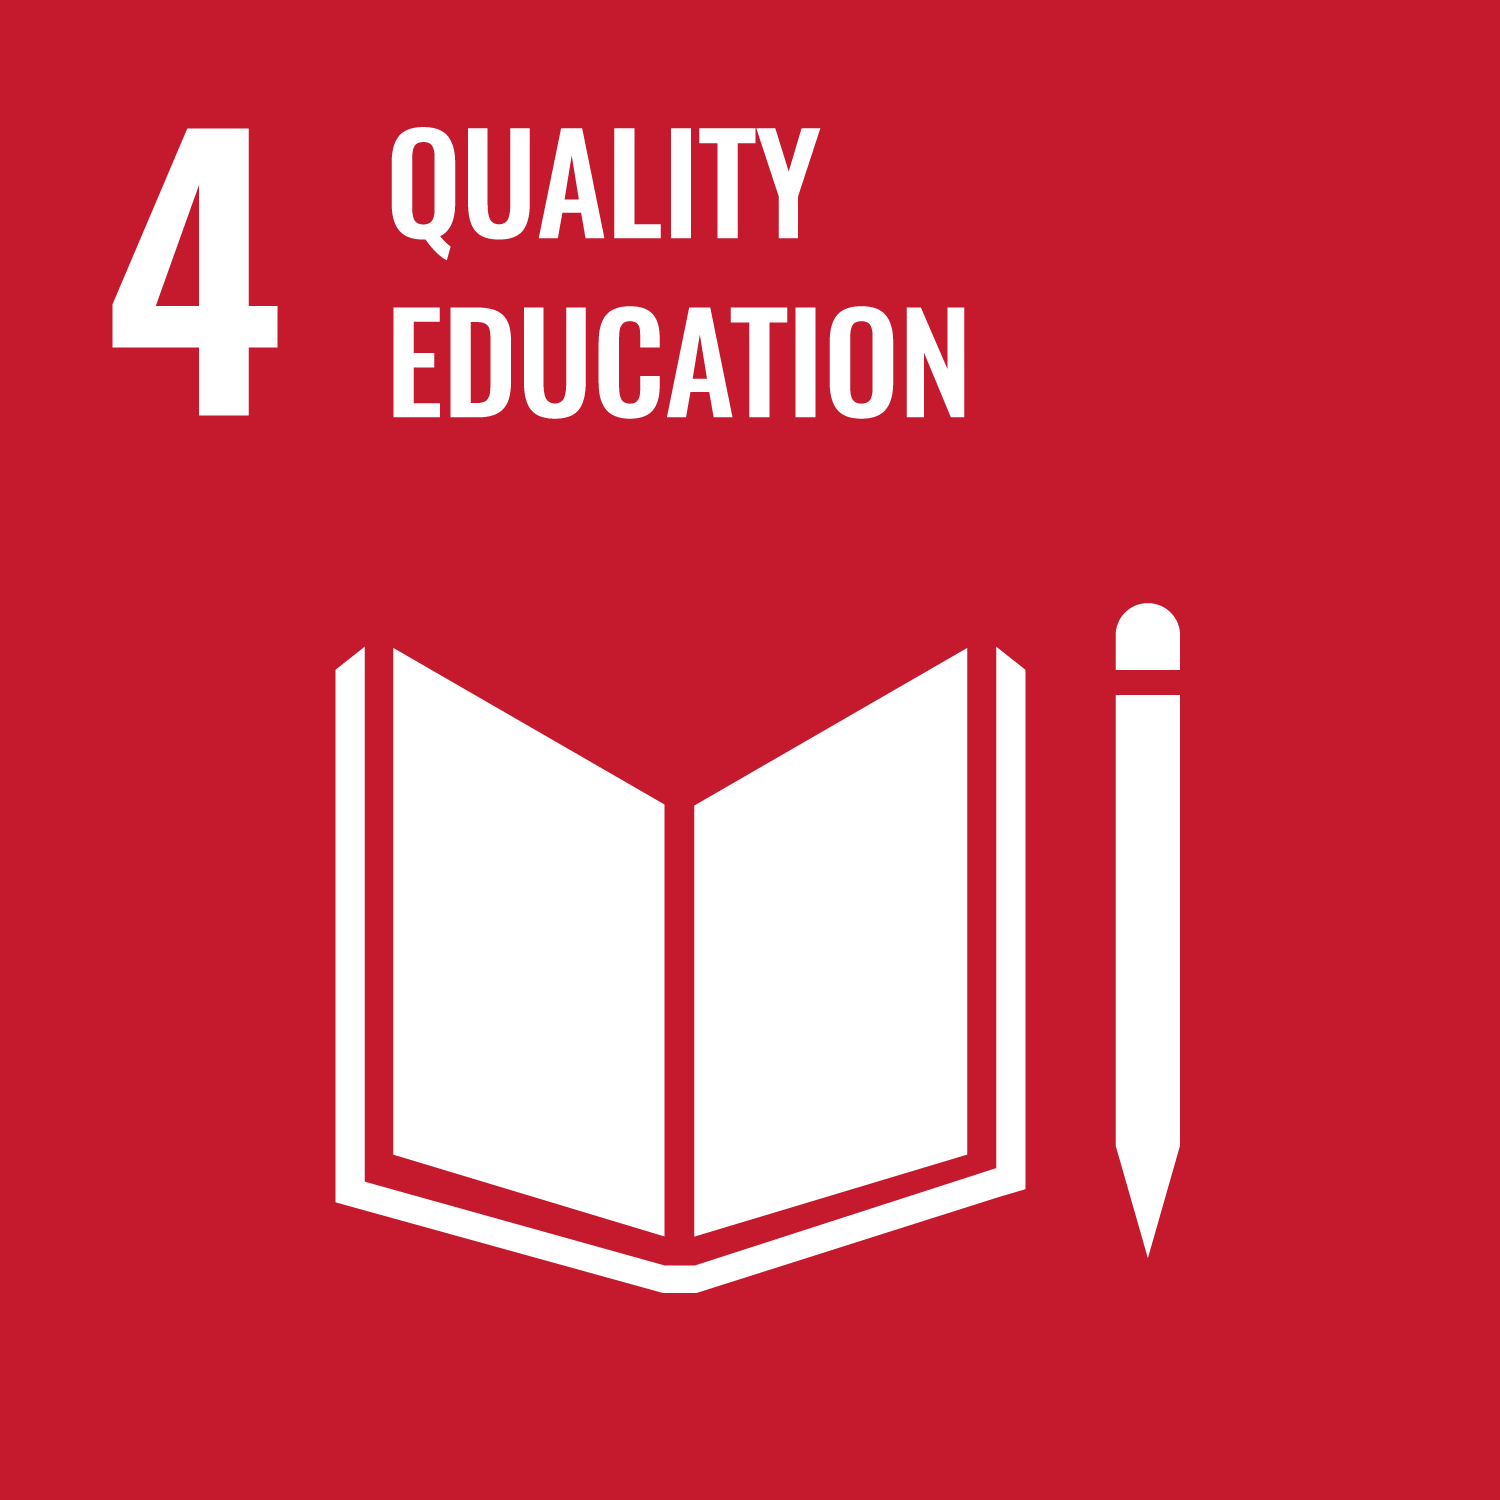 United Nation's 17 Sustainable Development Goals: Goal Number 4: Quality Education